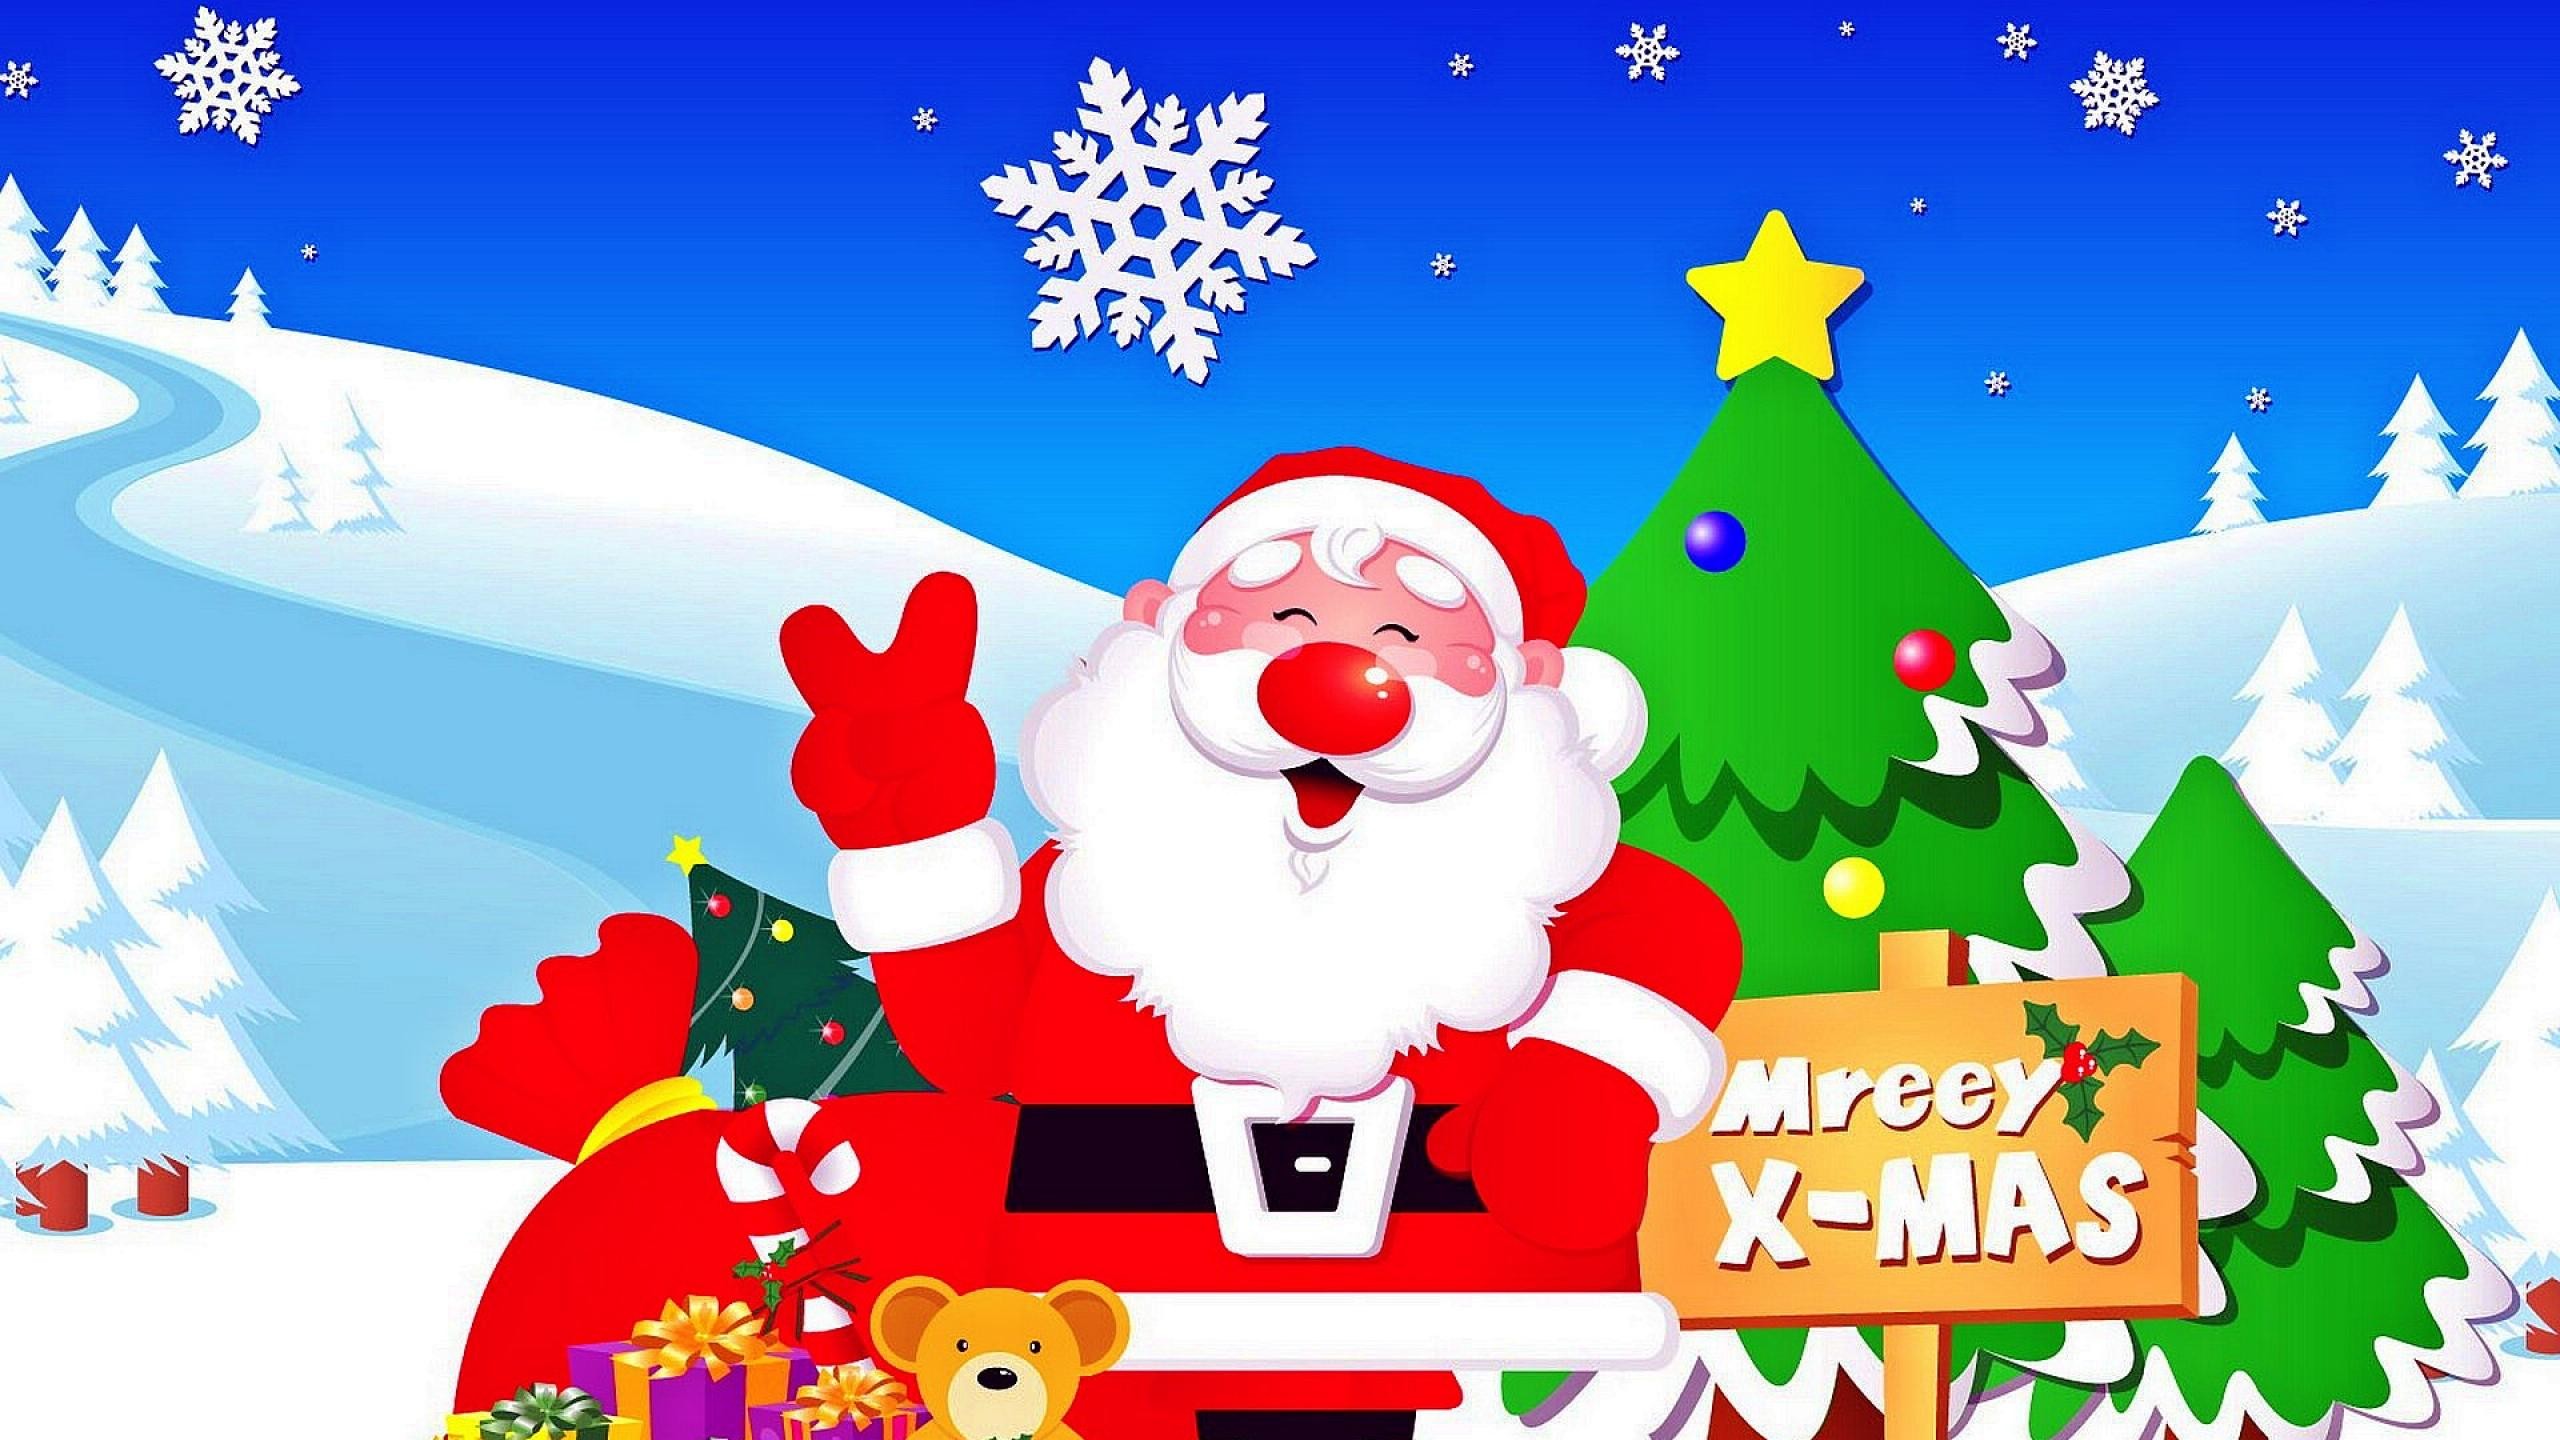 2560x1440 Cute Merry Christmas background Full HD 1080p Wallpapers | PIXHOME ...